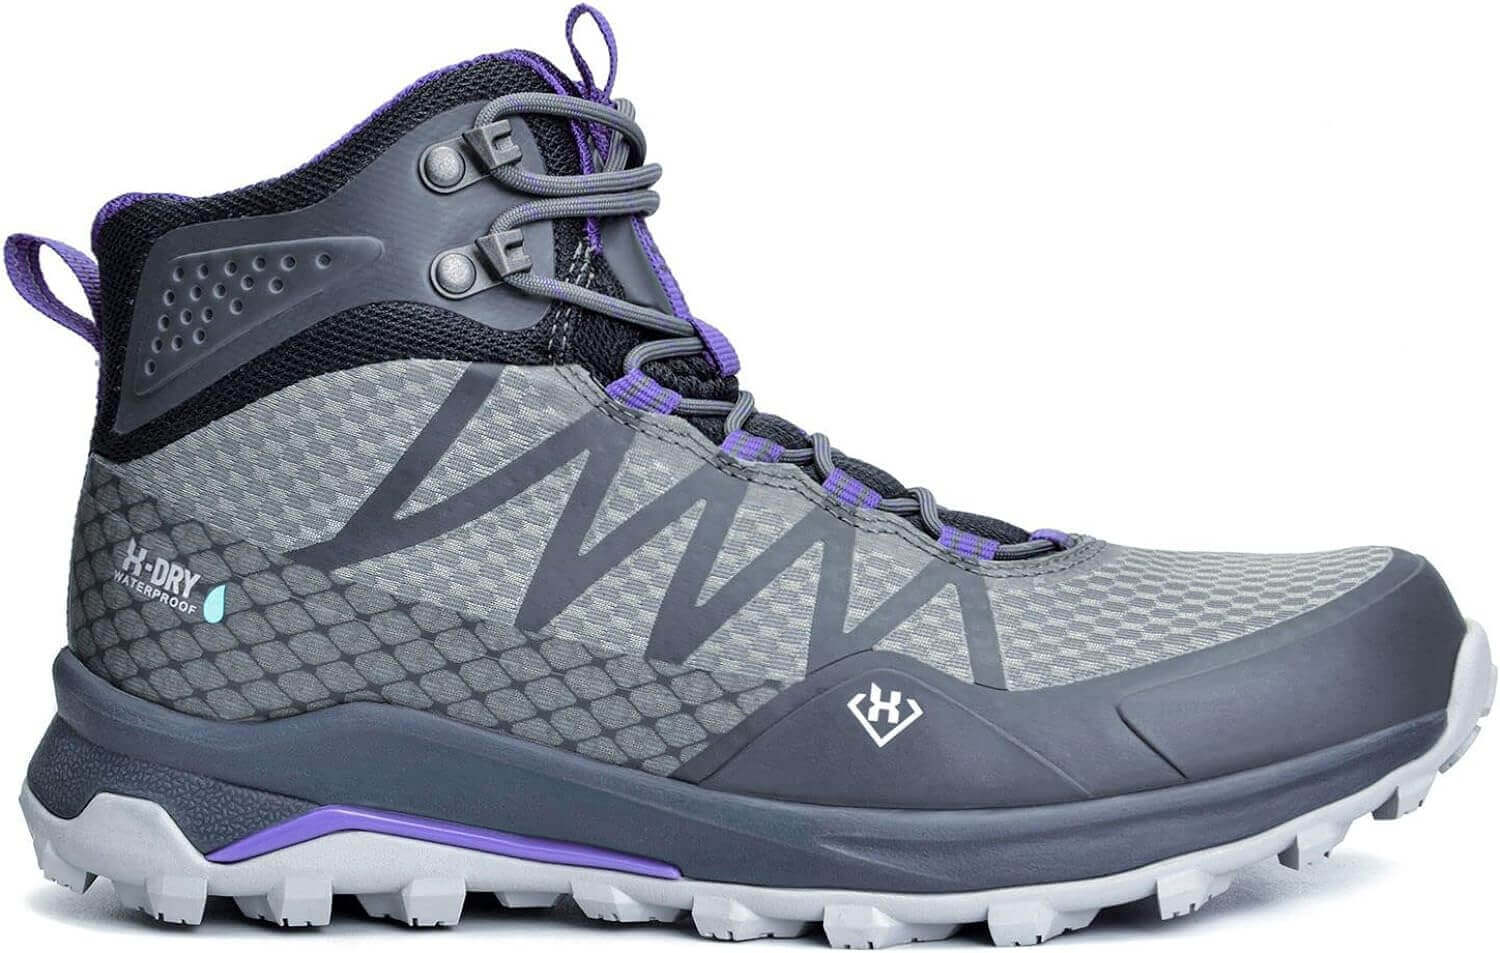 Shop The Latest >XPETI Women’s Fastrail II Speed Hiking Boots > *Only $80.99*> From The Top Brand > *XPETIl* > Shop Now and Get Free Shipping On Orders Over $45.00 >*Shop Earth Foot*